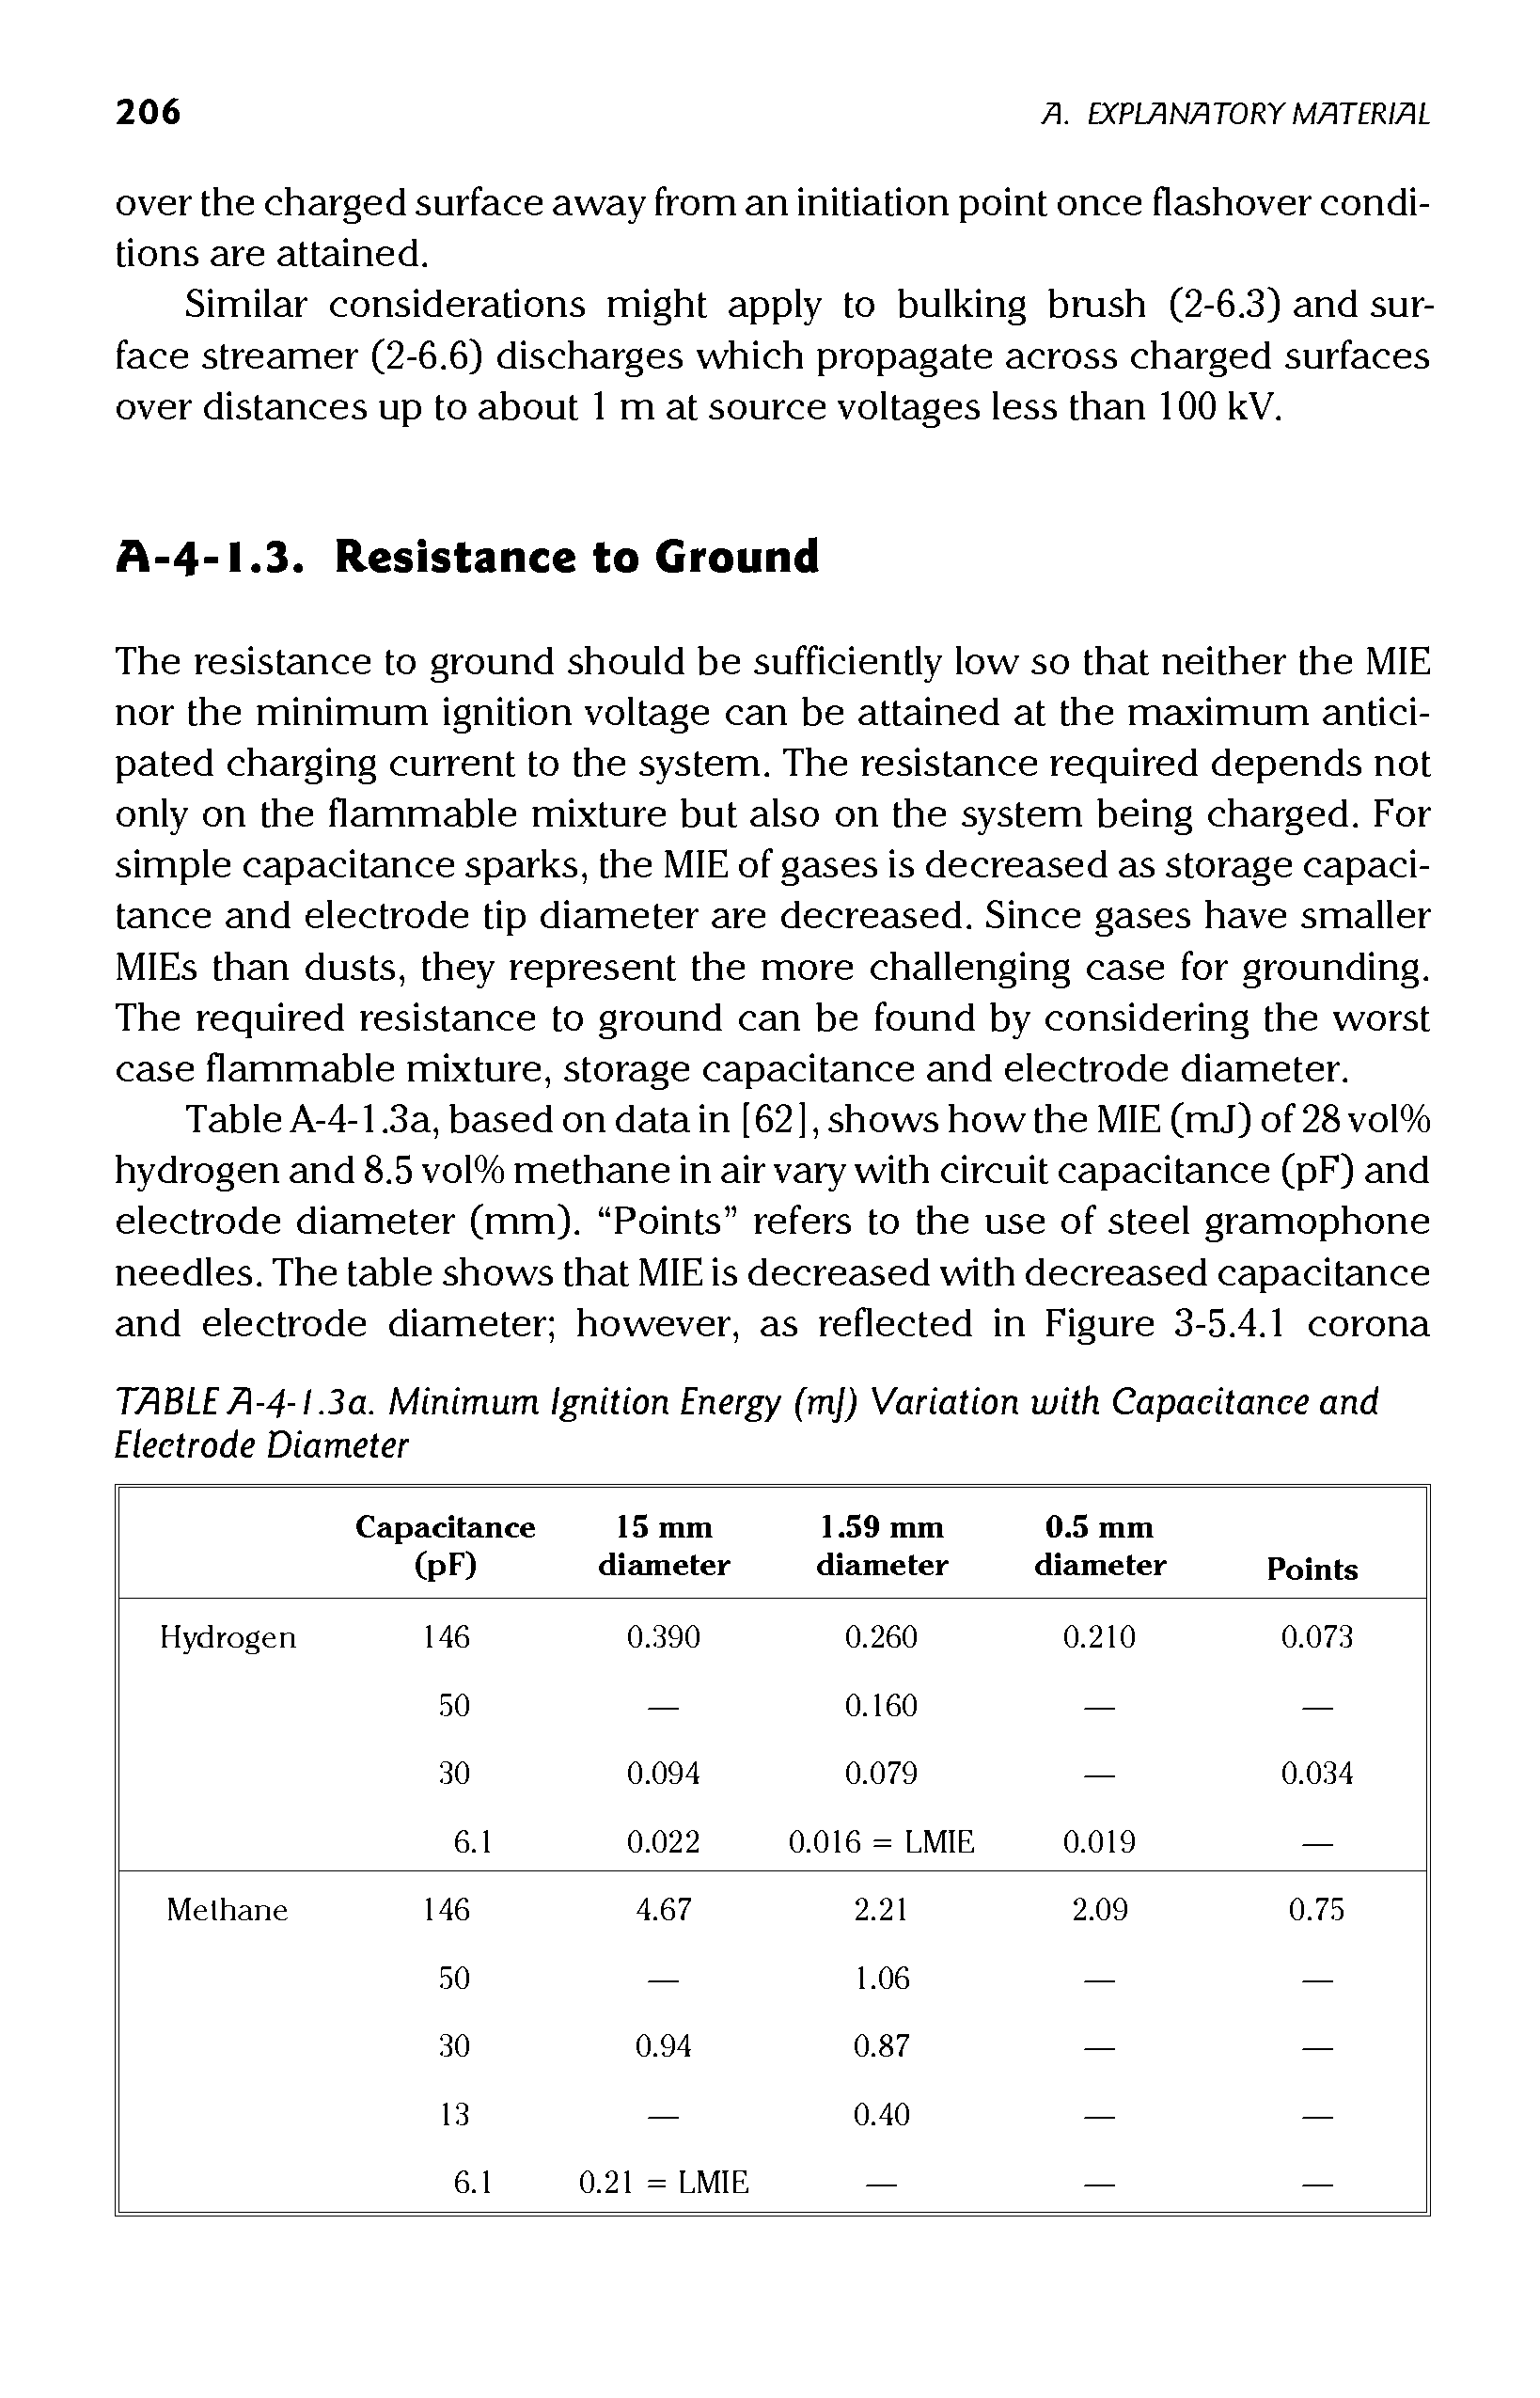 Table A-4-1.3a, based on data in [62], shows how the MIE (mJ) of 28 vol% hydrogen and 8.5 vol% methane in air vary with circuit capacitance (pF) and electrode diameter (mm). Points refers to the use of steel gramophone needles. The table shows that MIE is decreased with decreased capacitance and electrode diameter however, as reflected in Figure 3-5.4.1 corona...